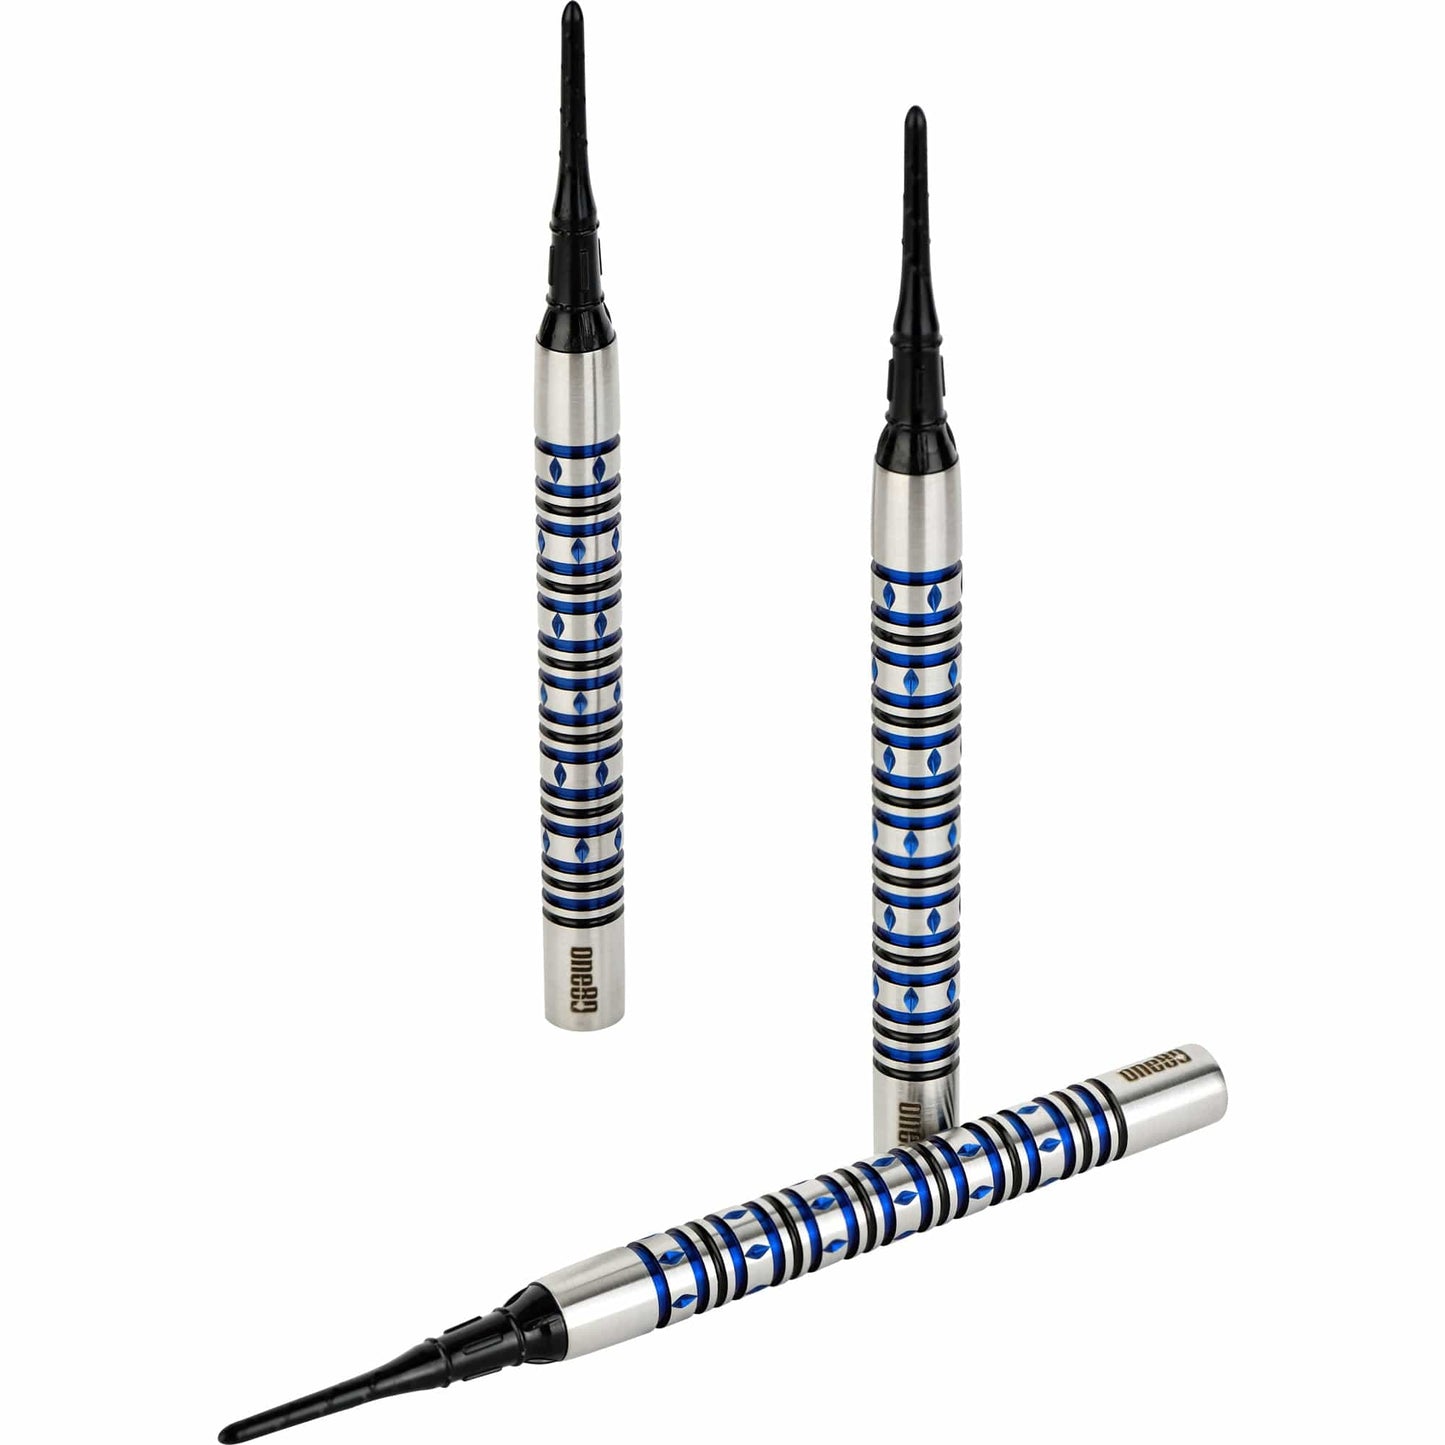 One80 Alexis Toylo Darts - Soft Tip - Cool Cat - Blue - 20g 20g